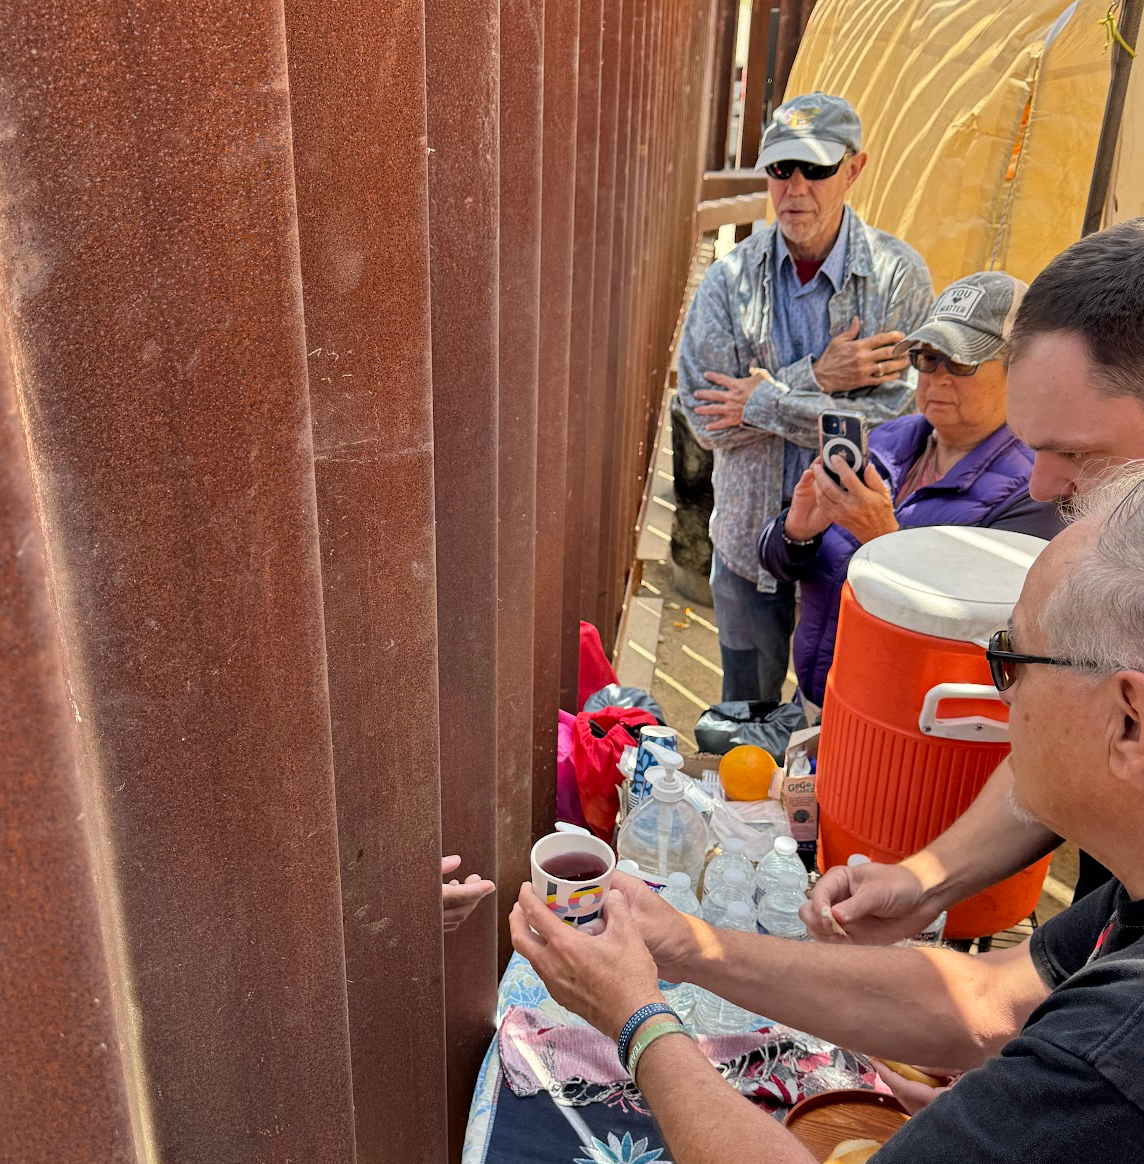 Volunteers at Whiskey 8 Humanitarian Aid site giving communion to a group of migrants on the other side of the wall, awaiting to be taken into processing from border patrol. This is during a worship service. 